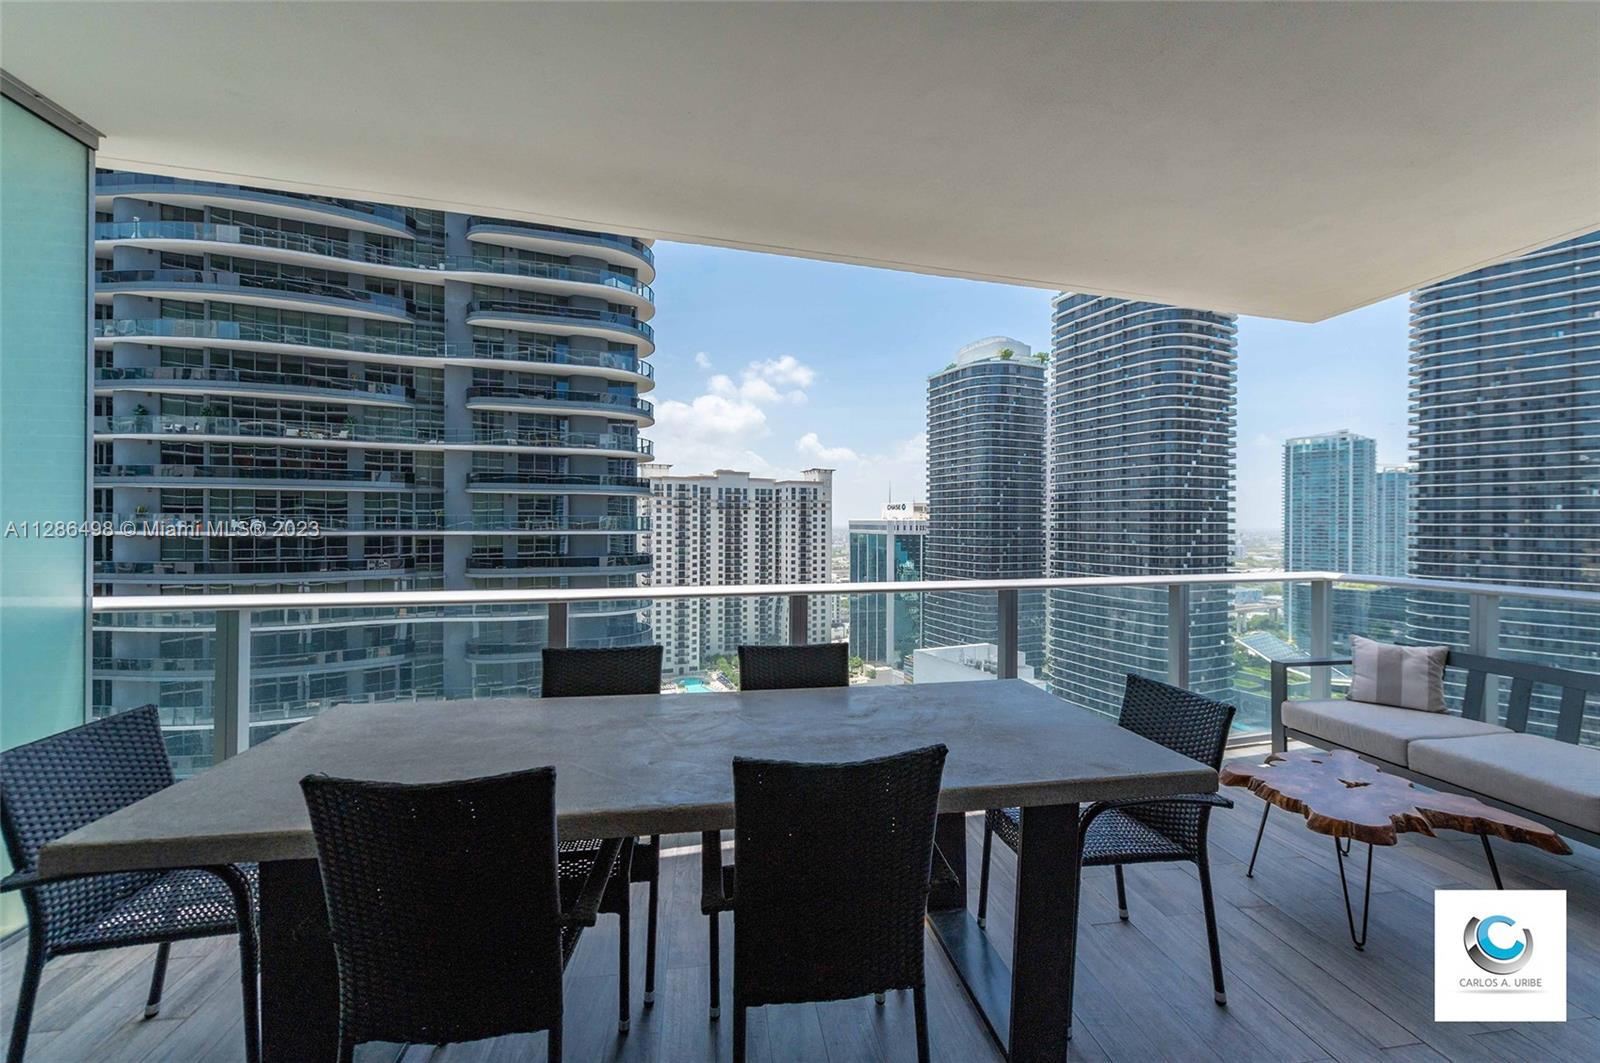 Spectacular Unfurnished corner unit 11 Line at 1010 Brickell Condo. Unit features: 1 bed + Enclosed Den, 1.5 baths, glass-enclosed shower, custom made closets, window treatments, wood like tile floors, 9-foot ceiling heights, top of the line Smeg appliances, & 1 Parking ! Live & play in this luxury building that offers: outdoor movie theatre, restaurant & swimming pool at 50th floor rooftop; Co-ed Hammam spa w cold & hot Jacuzzi, massage & treatments rooms, sauna & steam room at 12th floor; basketball & racquetball courts, running track, indoor heated swimming pool, fitness center, party room w kitchen, open terrace & barbeque, kids room w bowling, virtual golf simulator, ping-pong, among others. Excellent location next to public transportation, Brickell City Centre, & more.